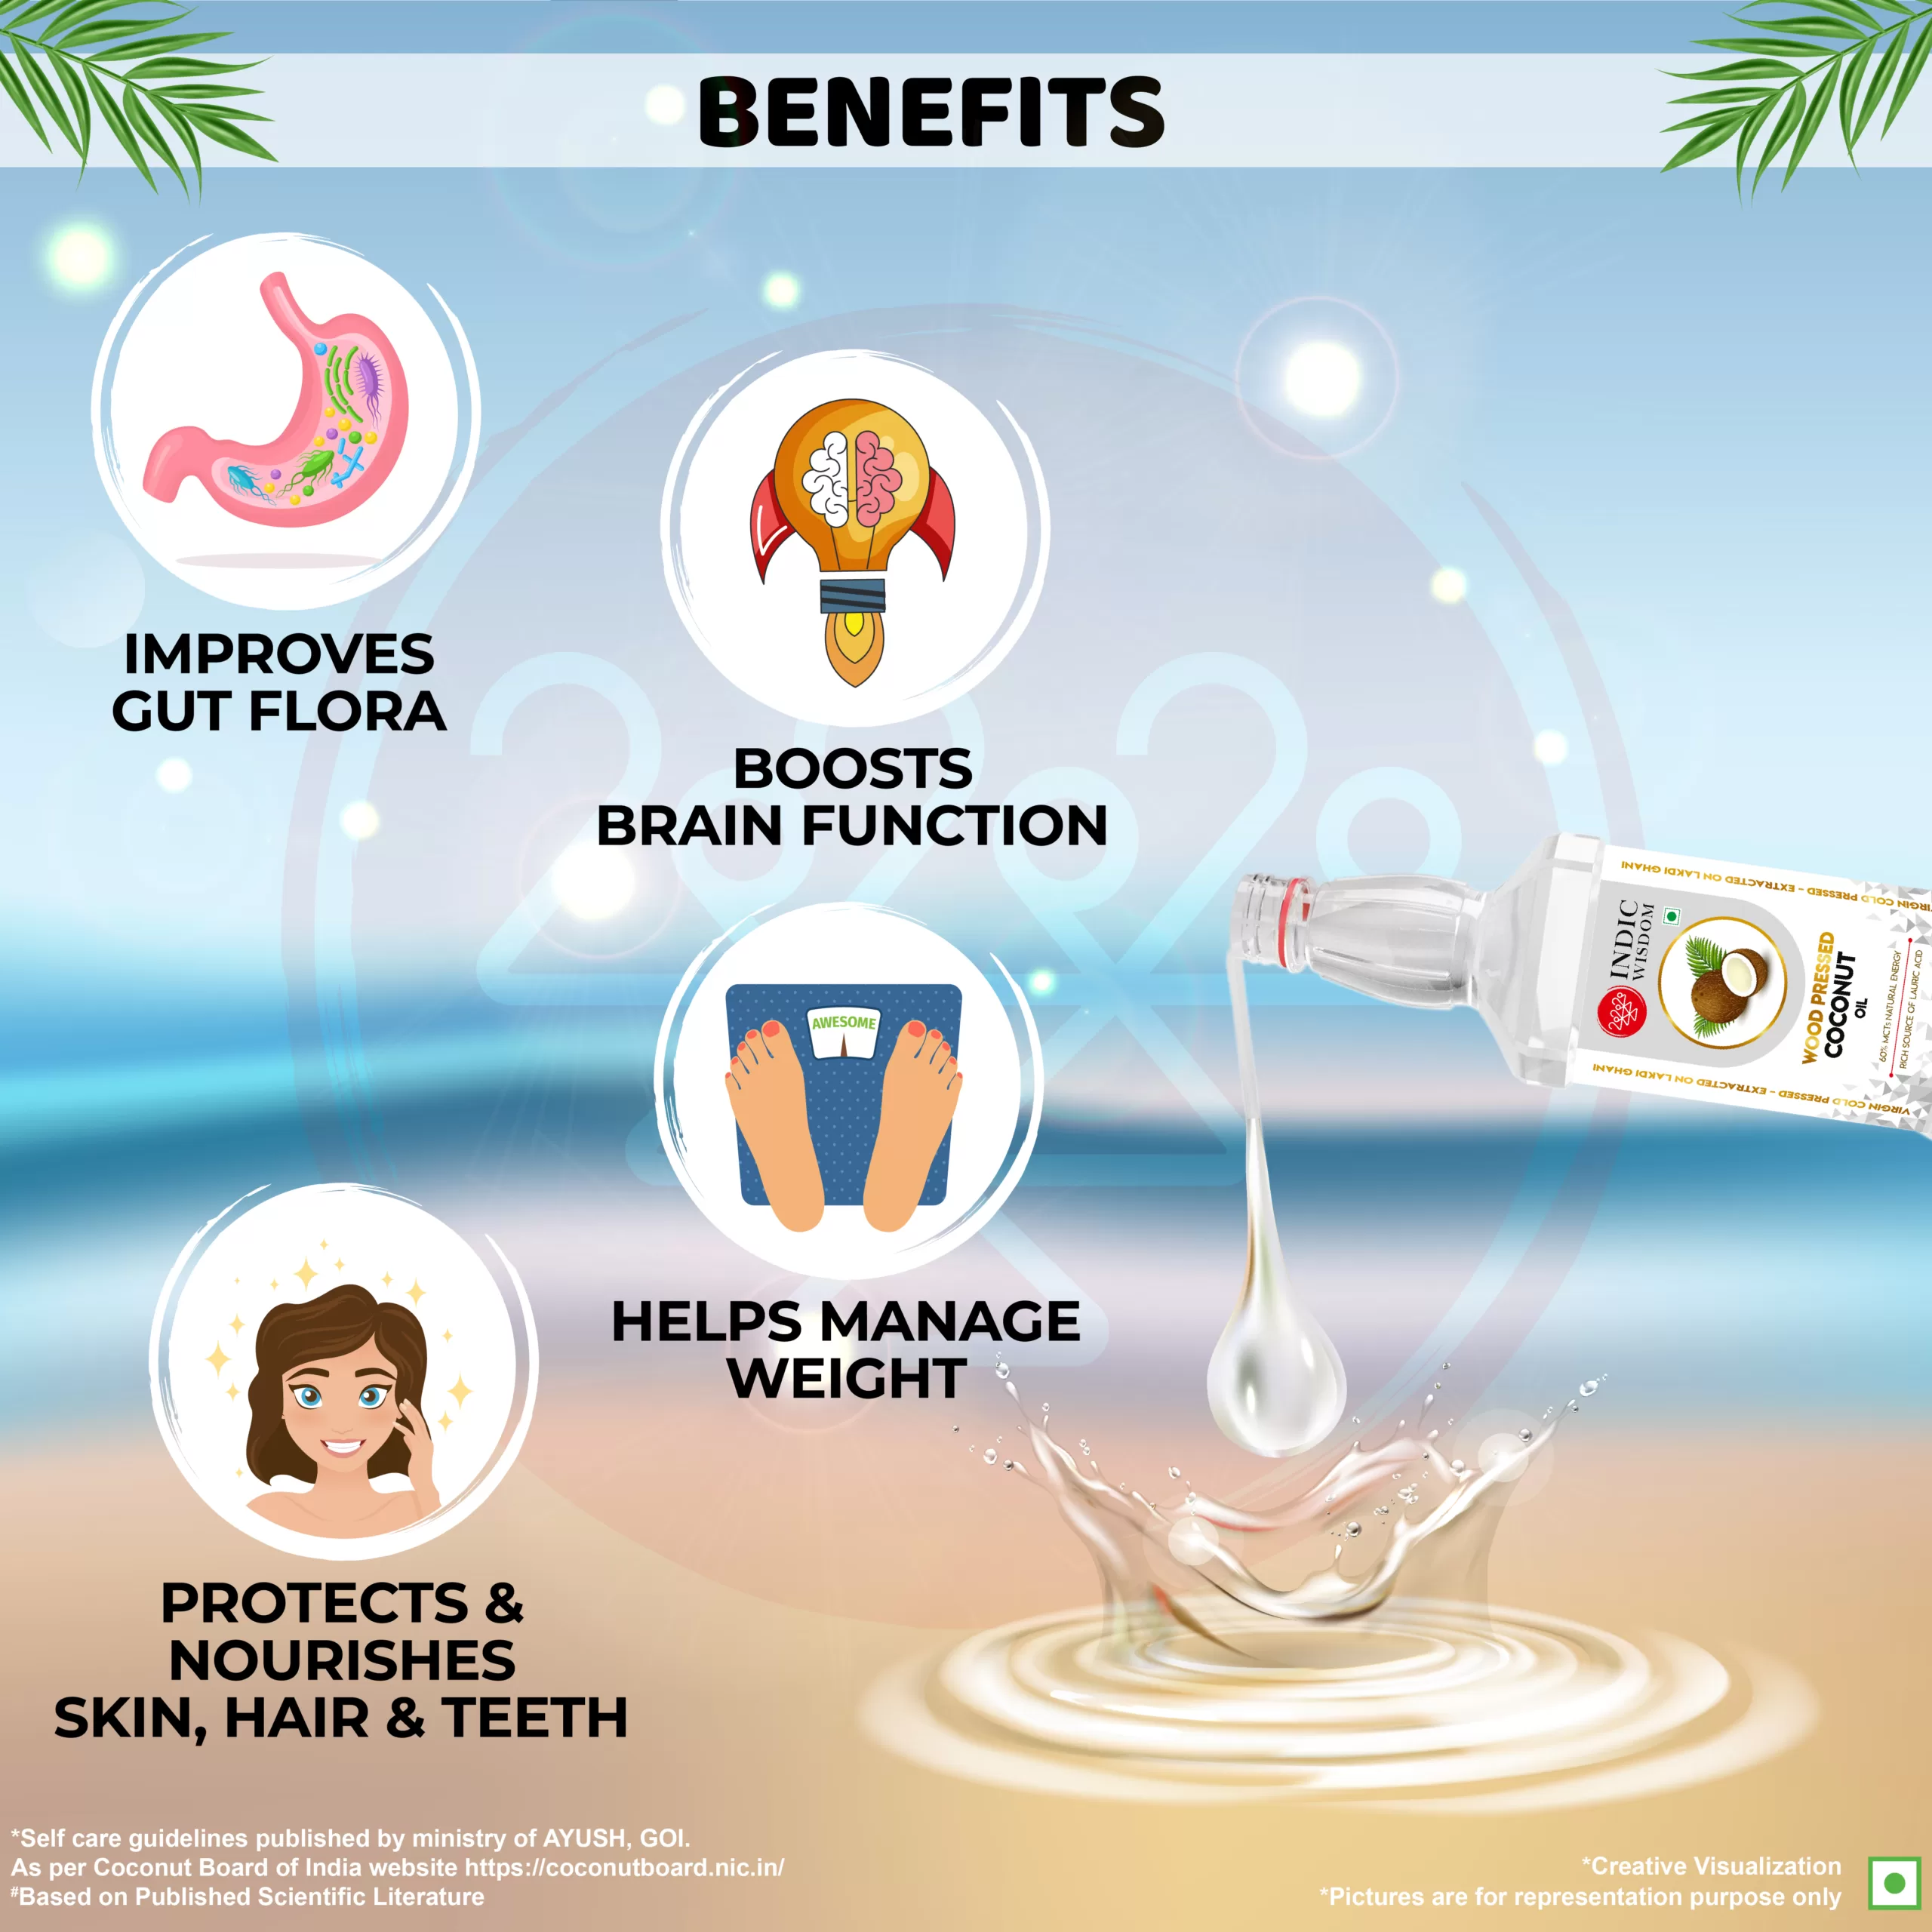 Benefits of wood pressed coconut oil